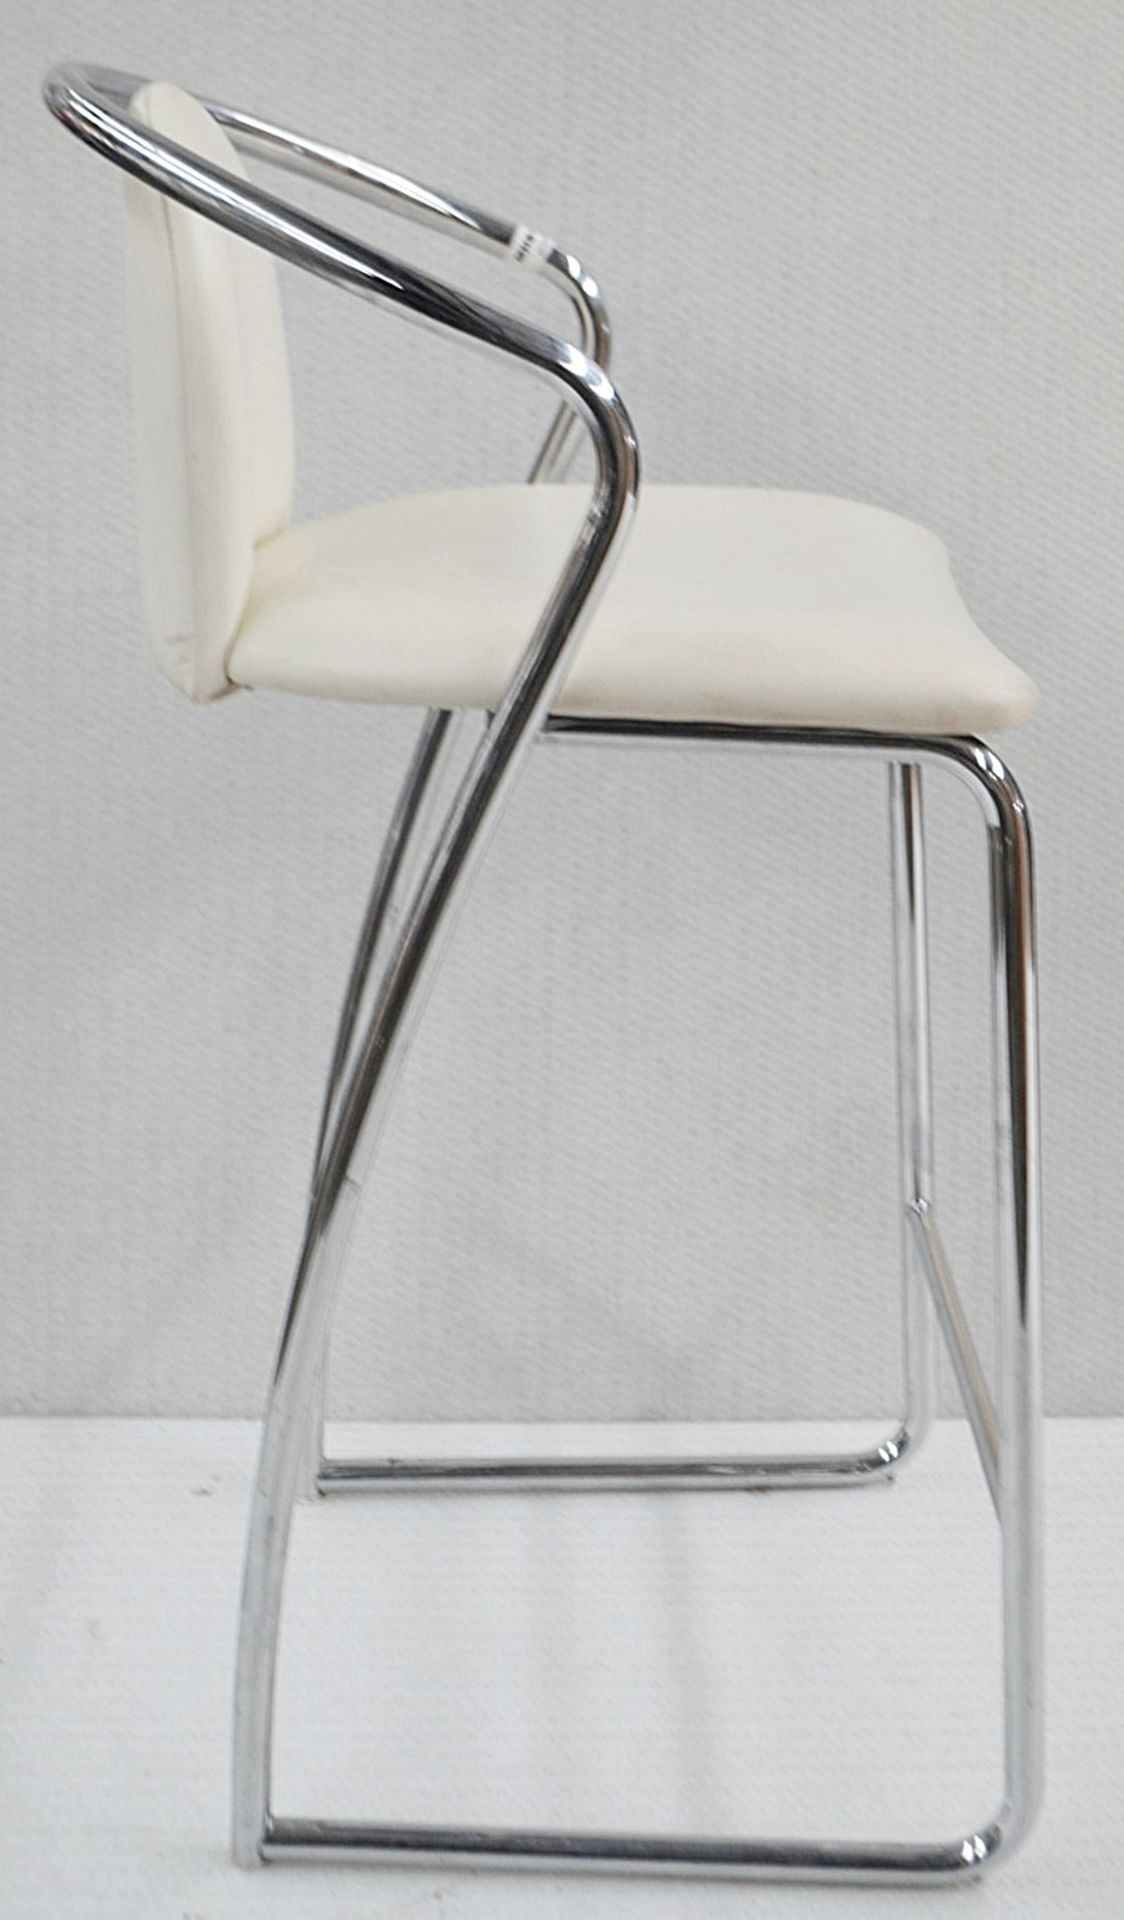 7 x Upholstered Salon / Beauty Counter Stools In Light Cream And Chrome - Dimensions: W47 x D50 x - Image 3 of 4